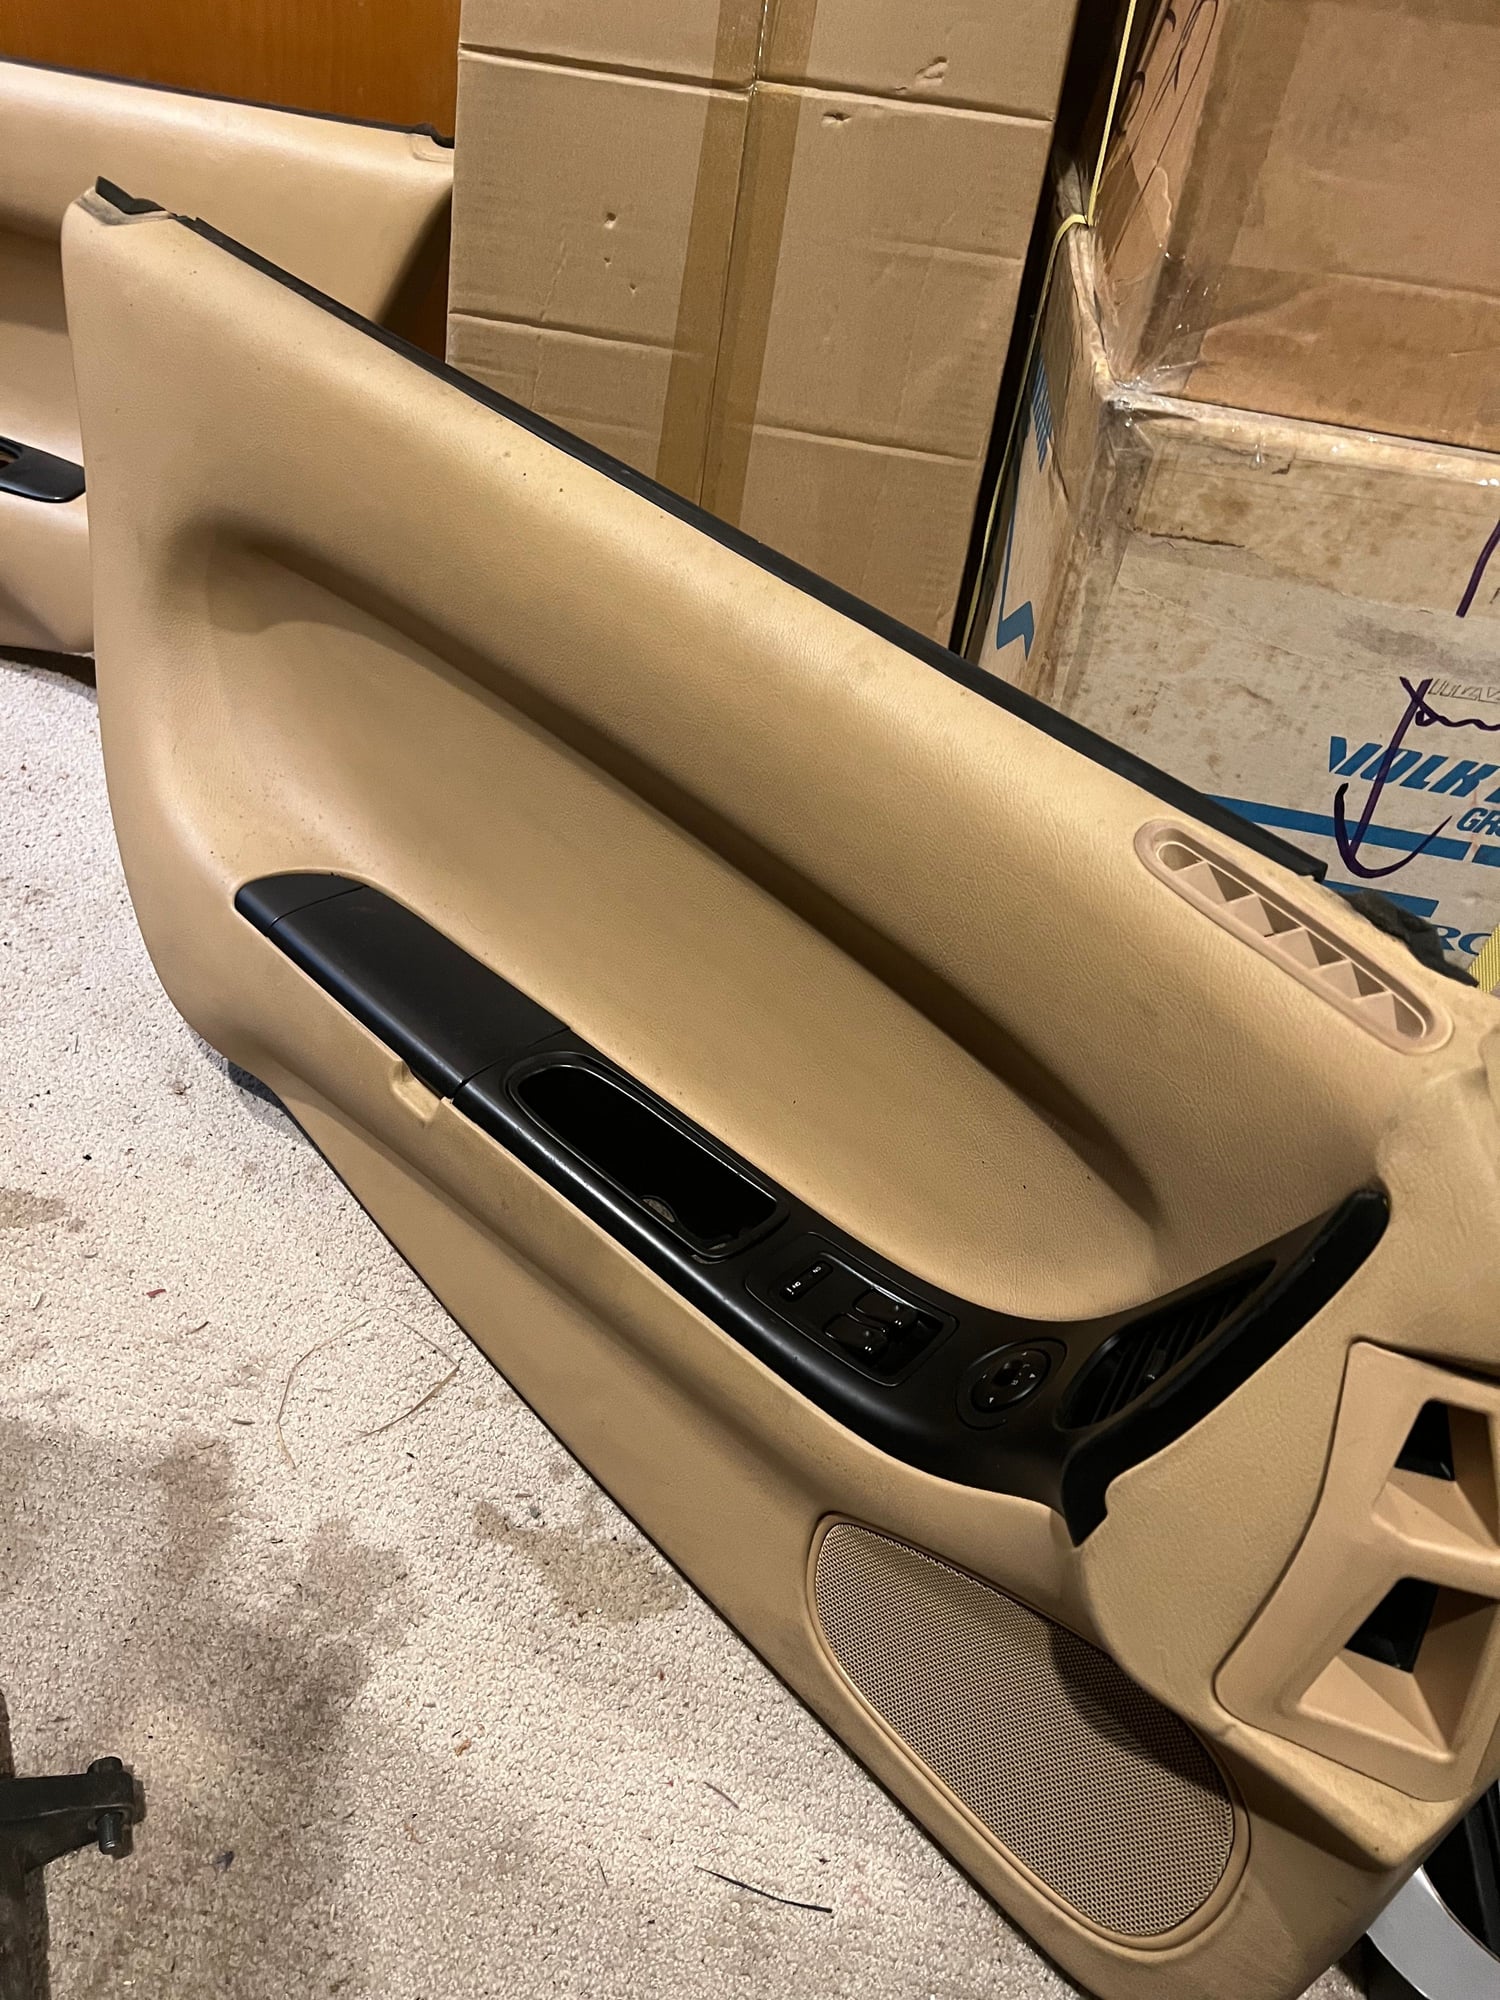 Interior/Upholstery - Tan interior pieces - Used - 1993 to 2002 Mazda RX-7 - Edmonds, WA 98020, United States